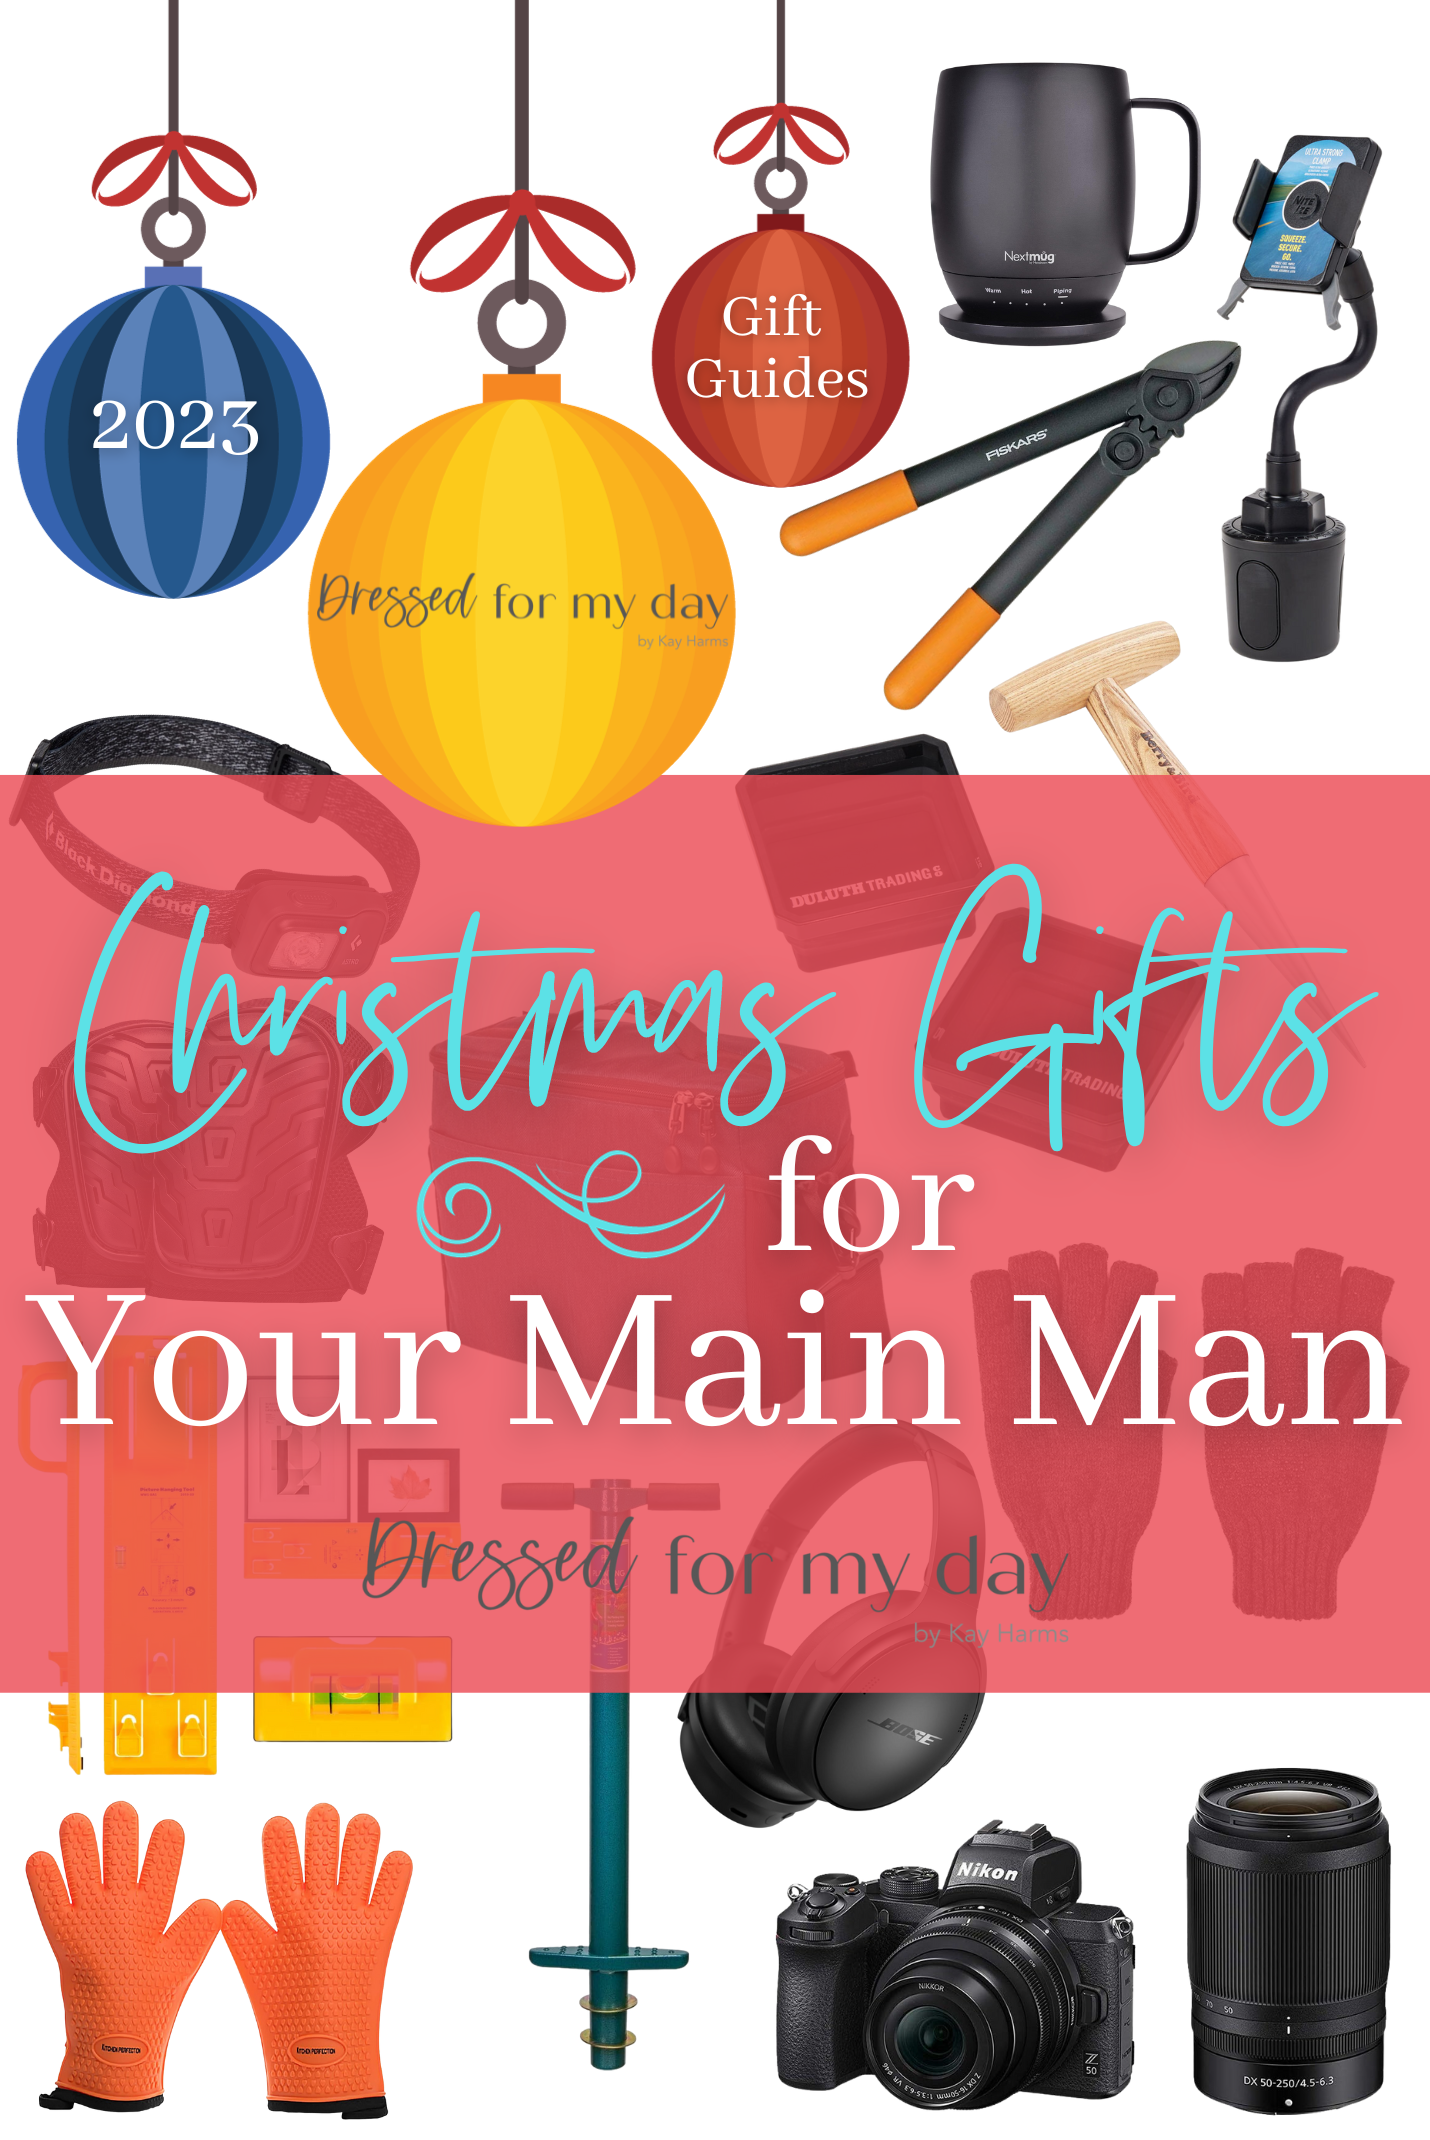 Christmas Gifts for Your Main Man